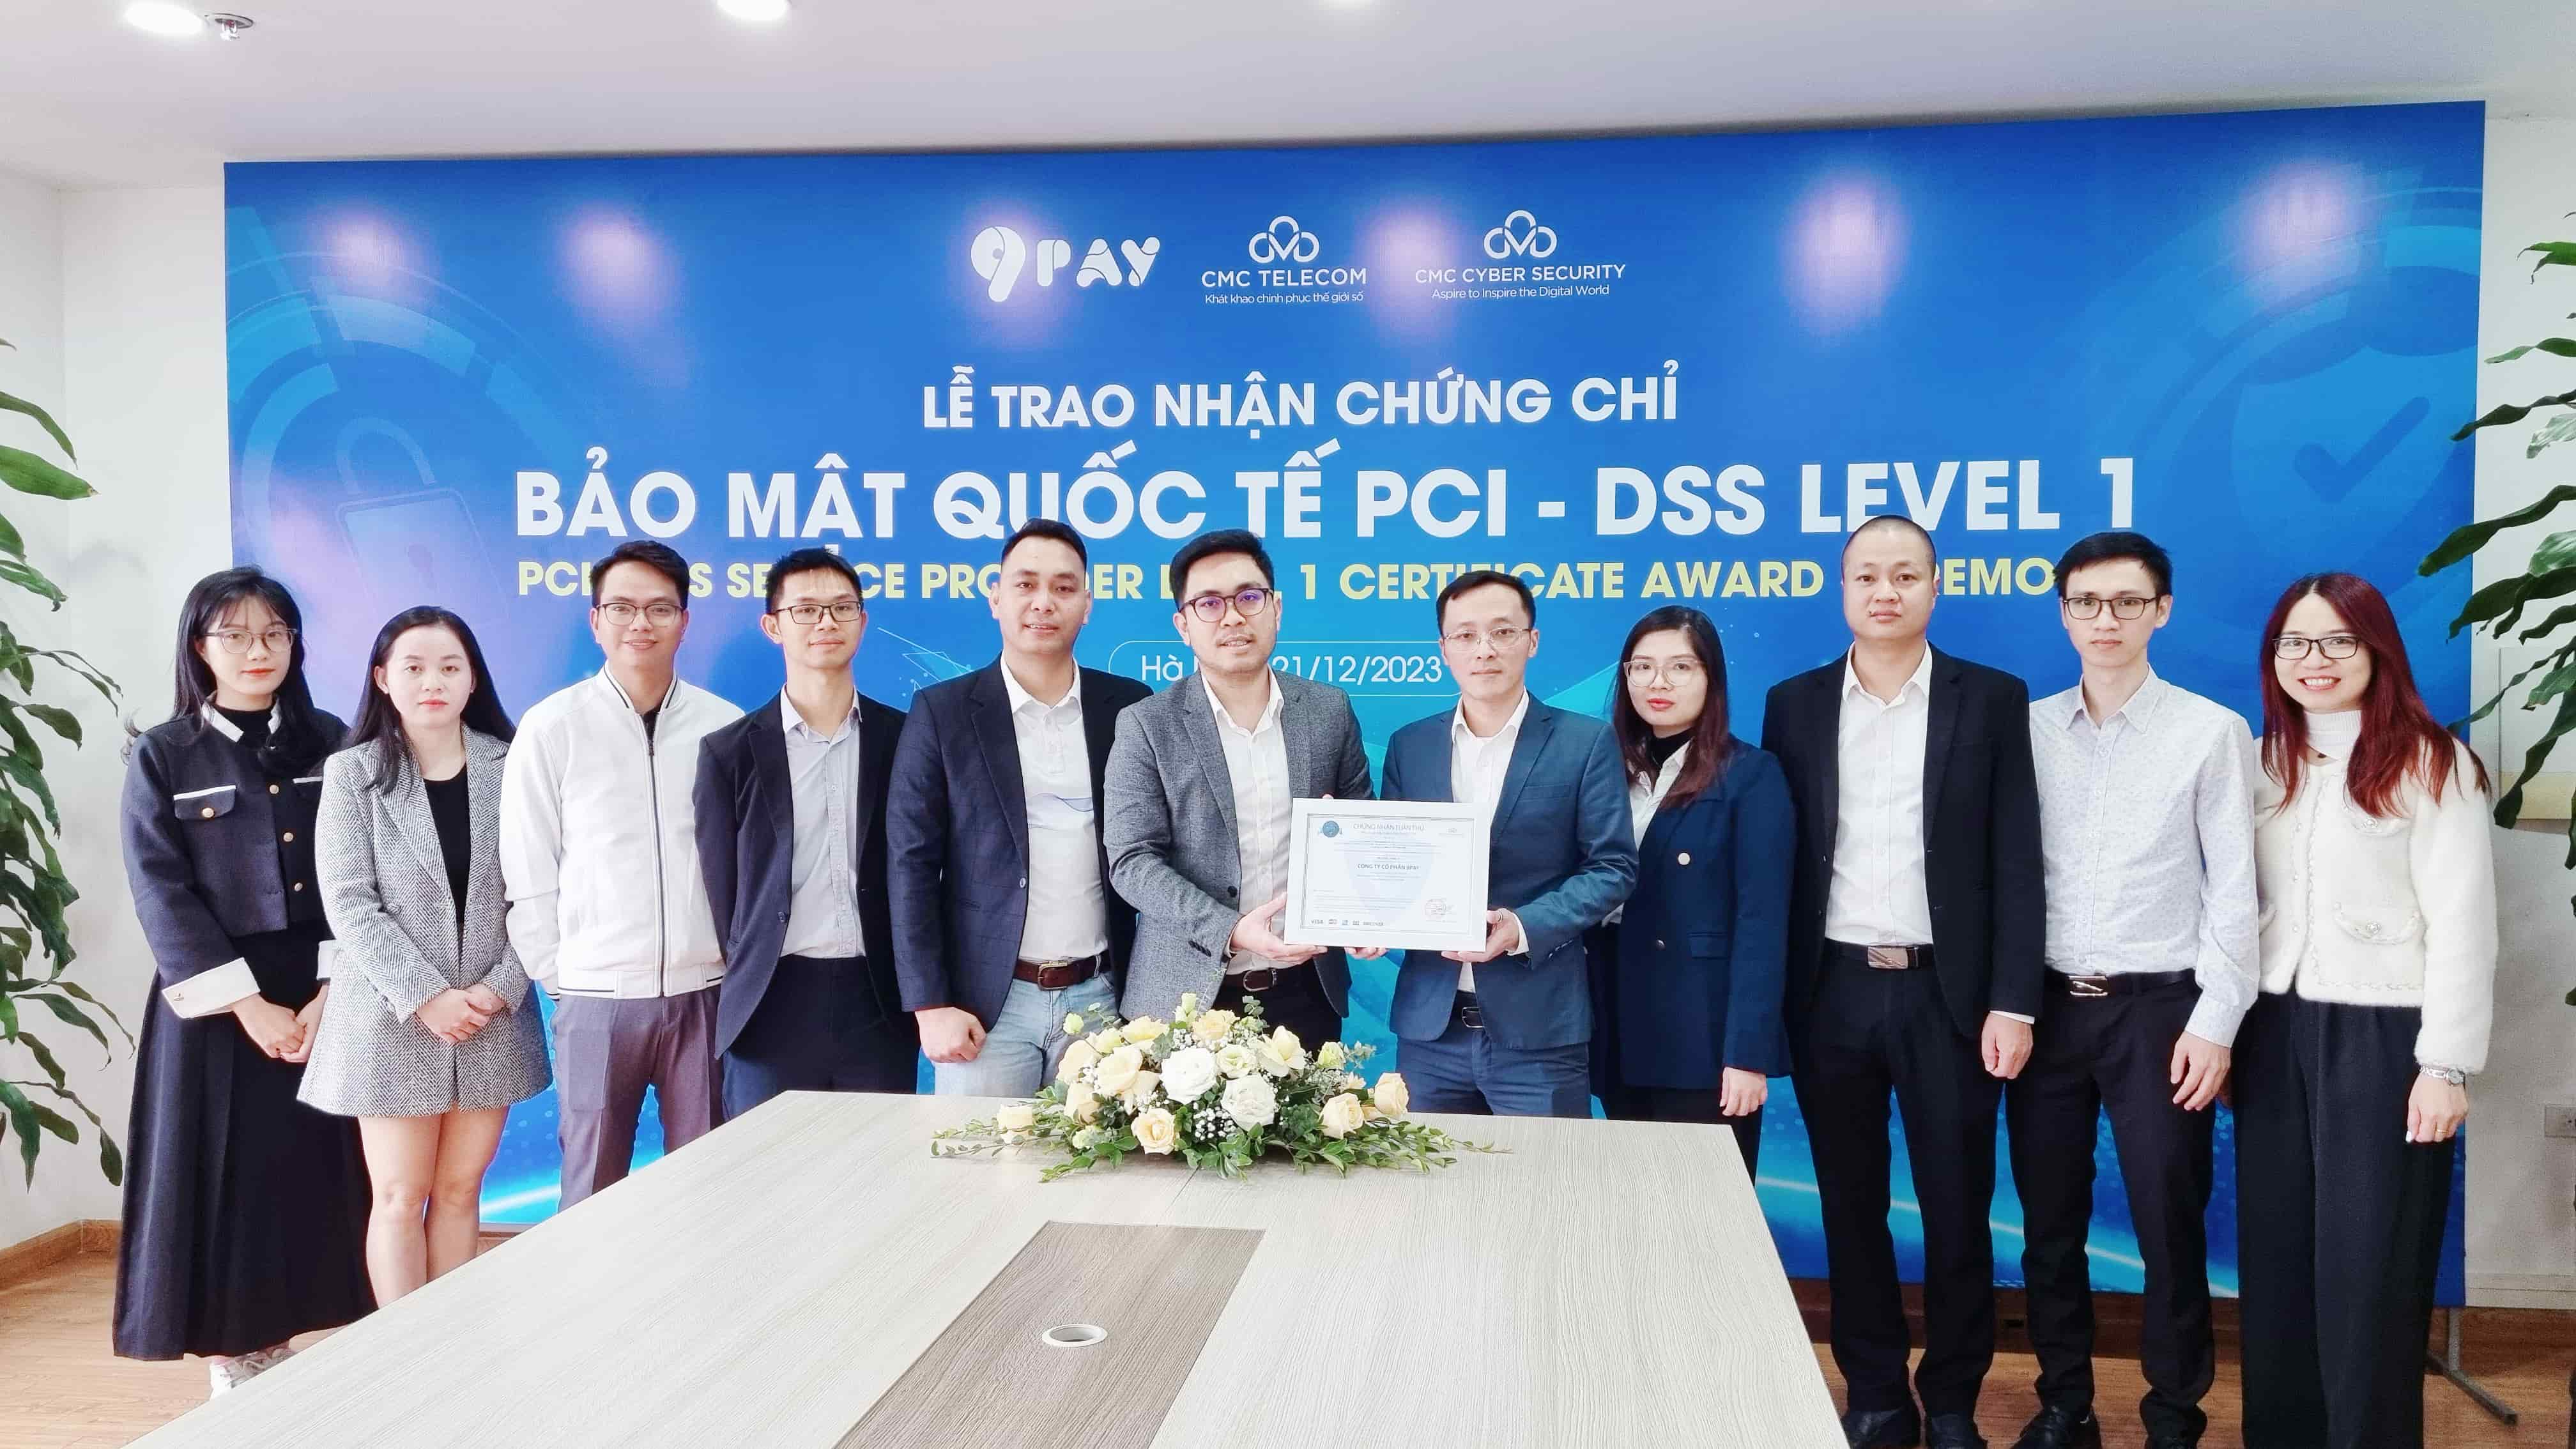 paZ-9pay-achieves-the-highest-level-of-international-pci-dss-security-certification